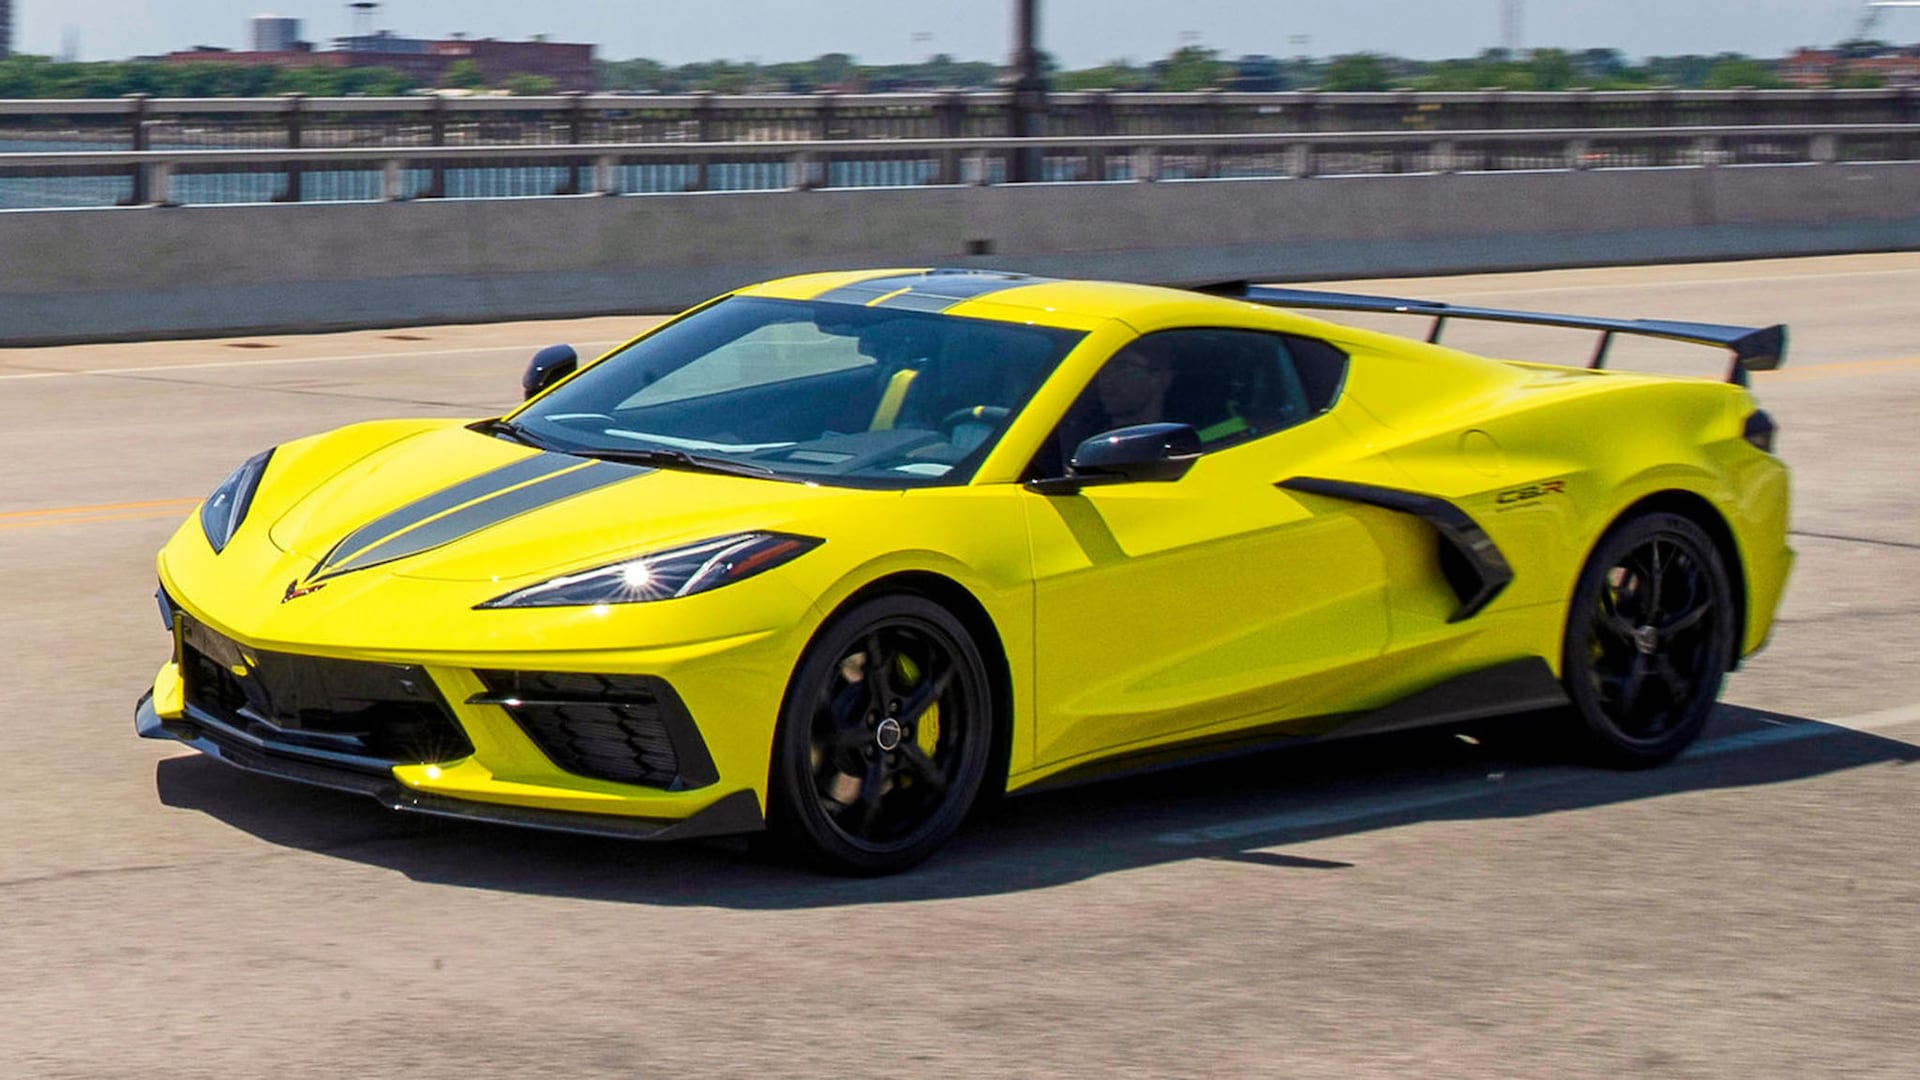 2022 Chevrolet Corvette Prices, Reviews, and Photos - MotorTrend